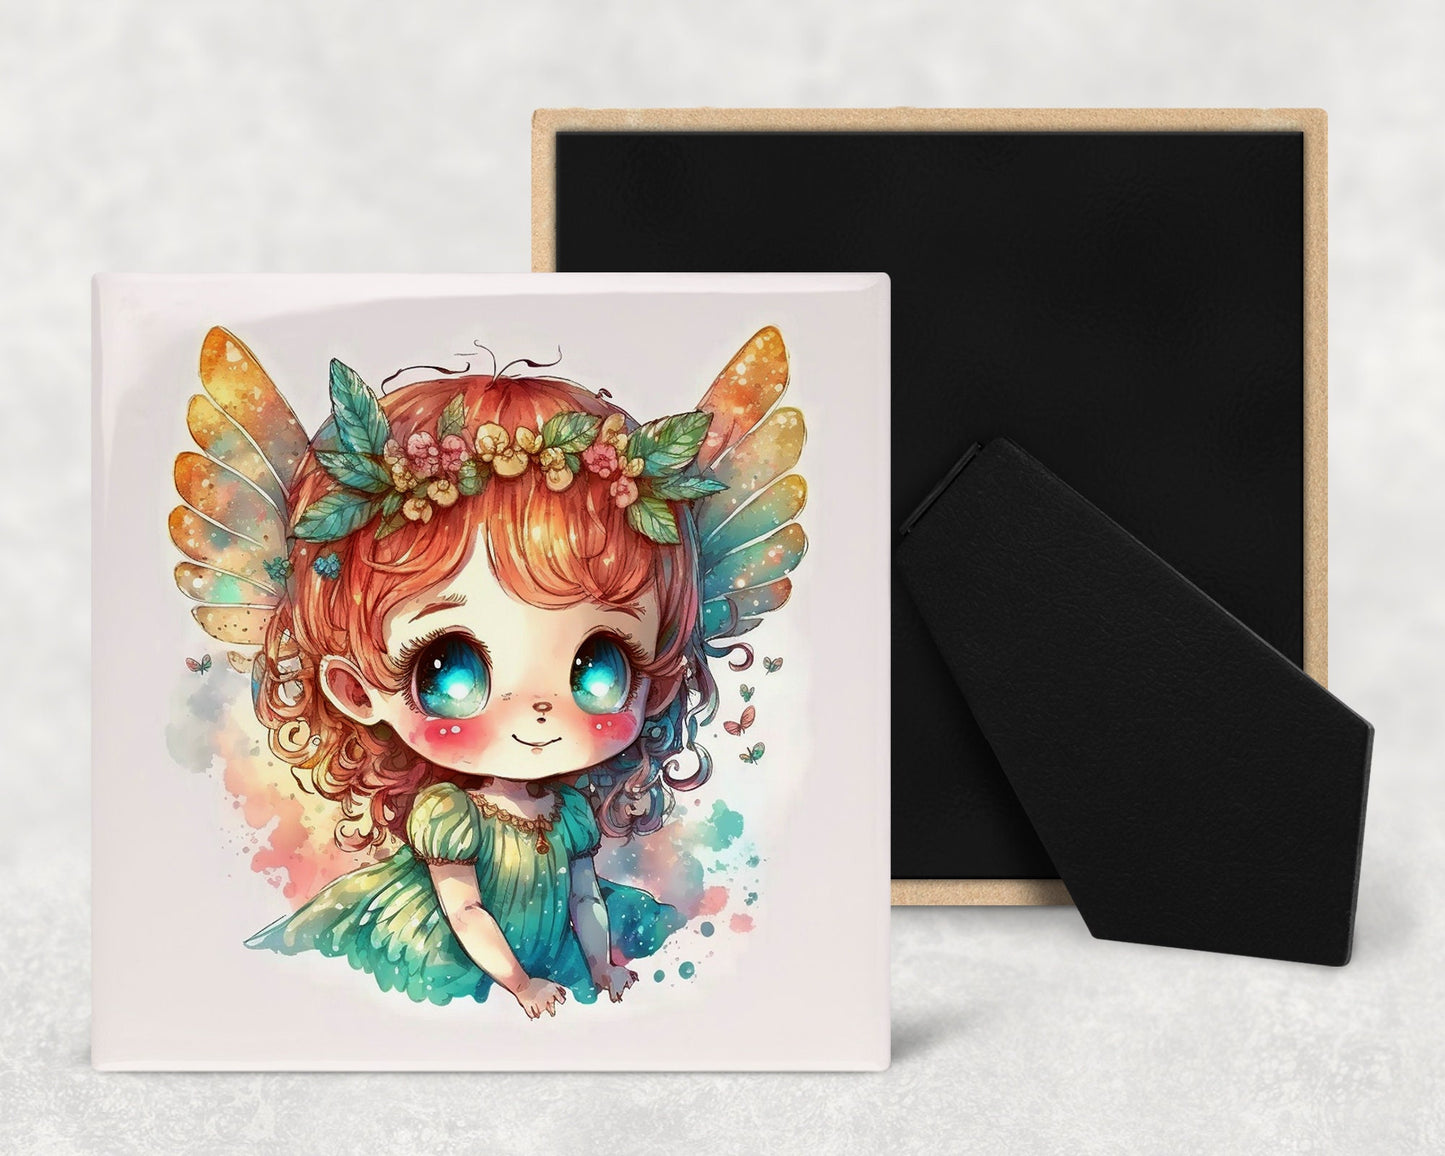 Cute Fae Art Decorative Ceramic Tile Set with Optional Easel Back - Available in 4 sizes - Set of 4